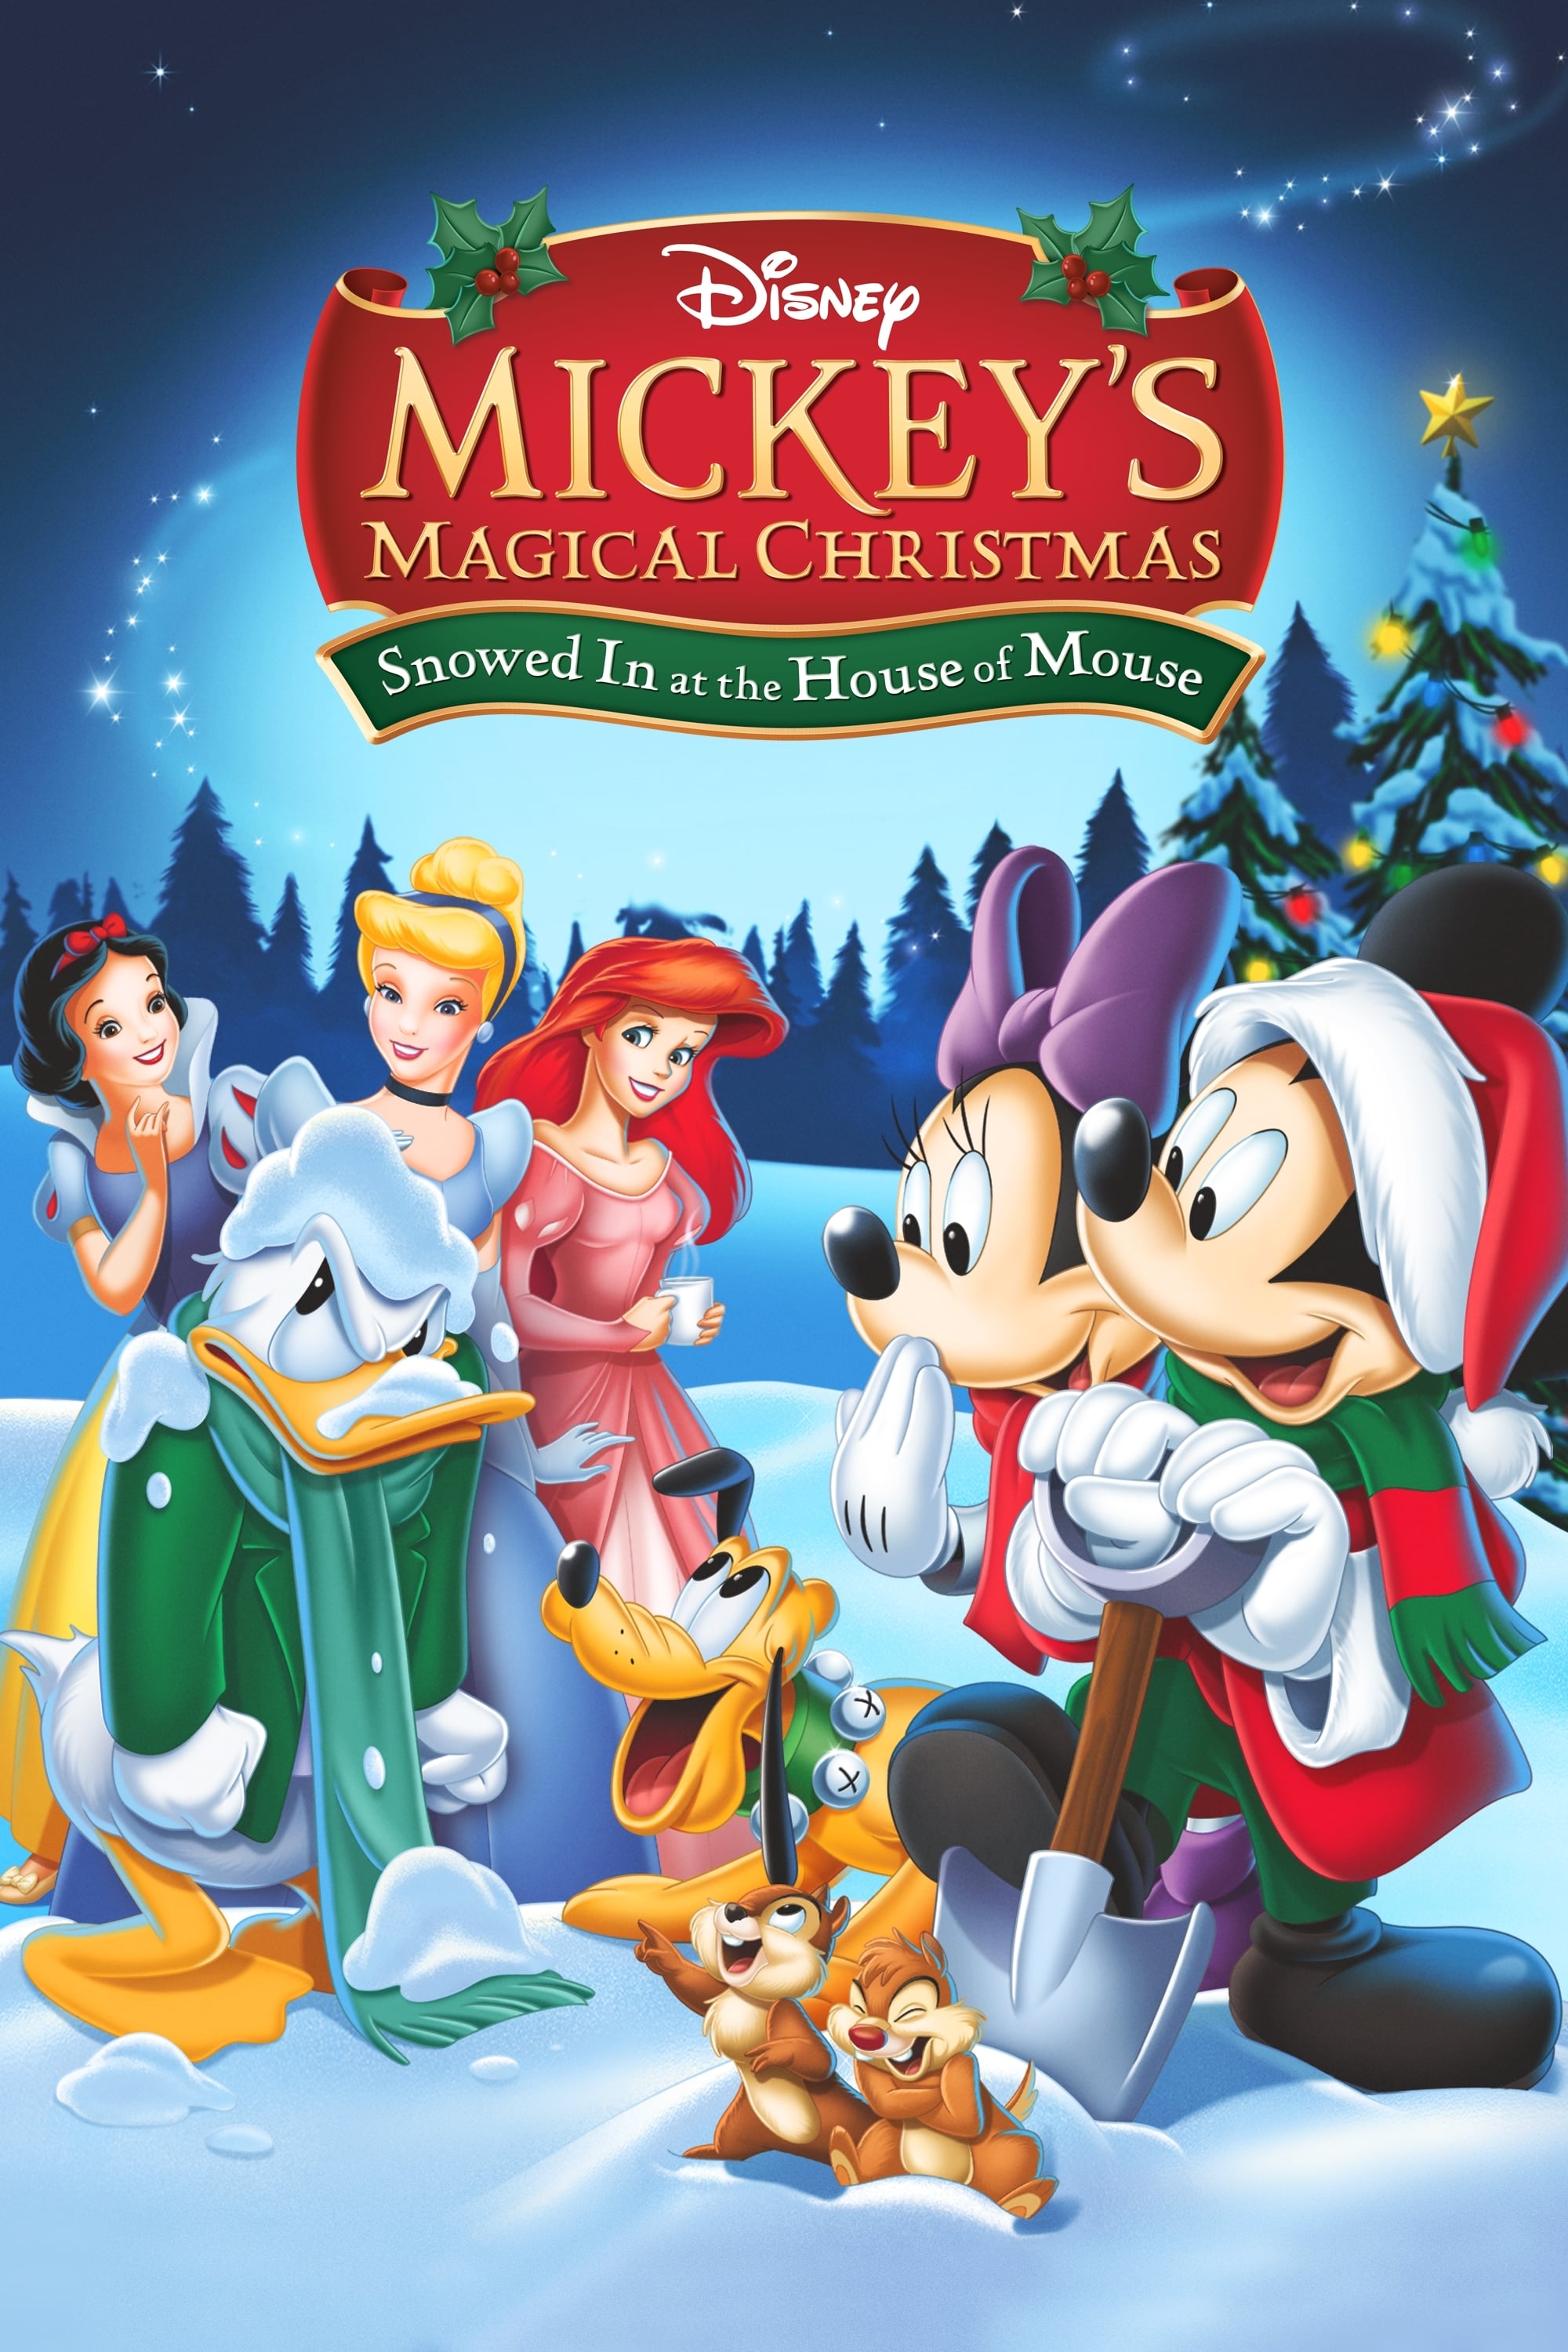 Mickey's Magical Christmas: Snowed in at the House of Mouse (2001)